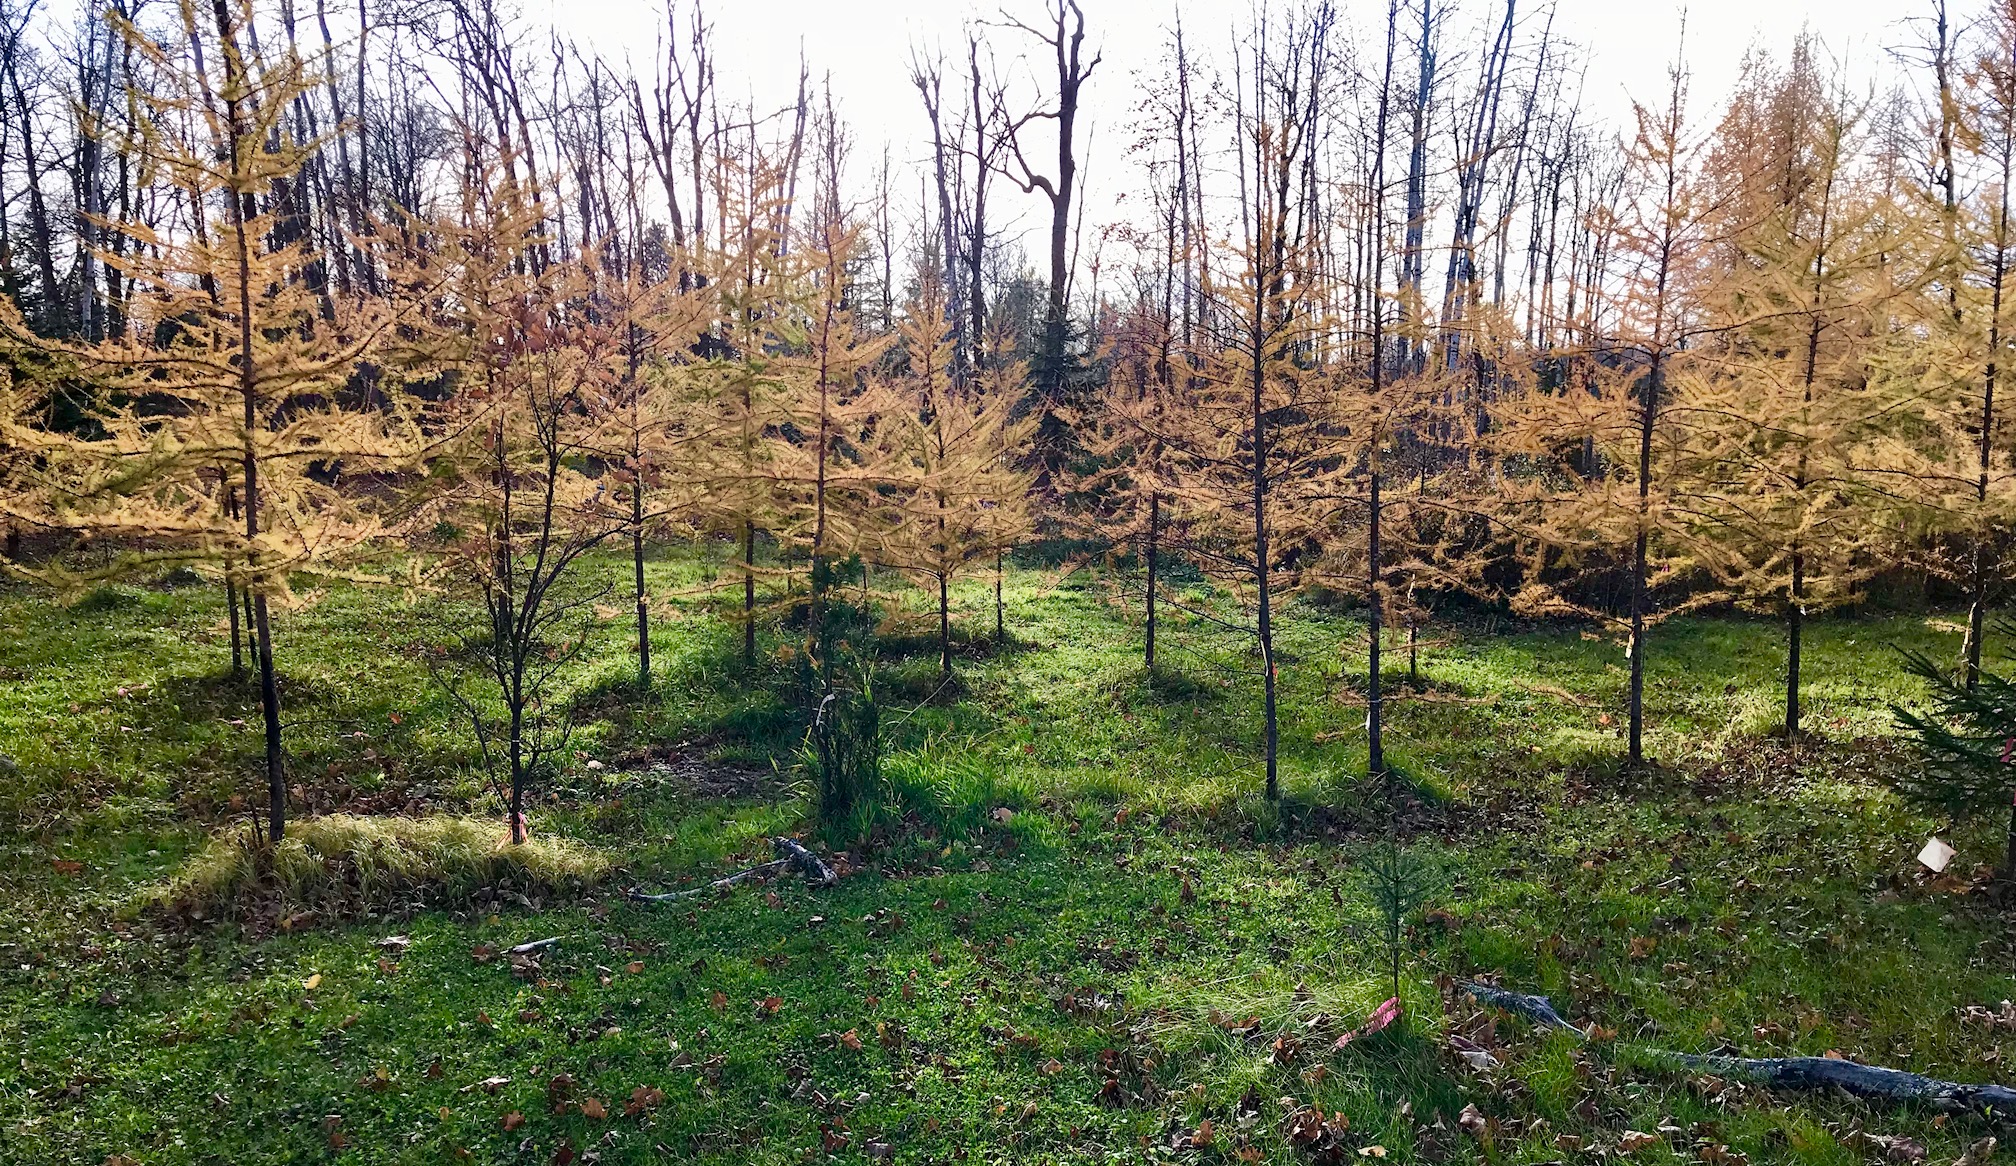 Tamarack trees in their peak. October 18th, 2017. Tamarack one of species of trees planted at Maplelag over the years. Maplelag has planted nearly a half million trees since 1973!